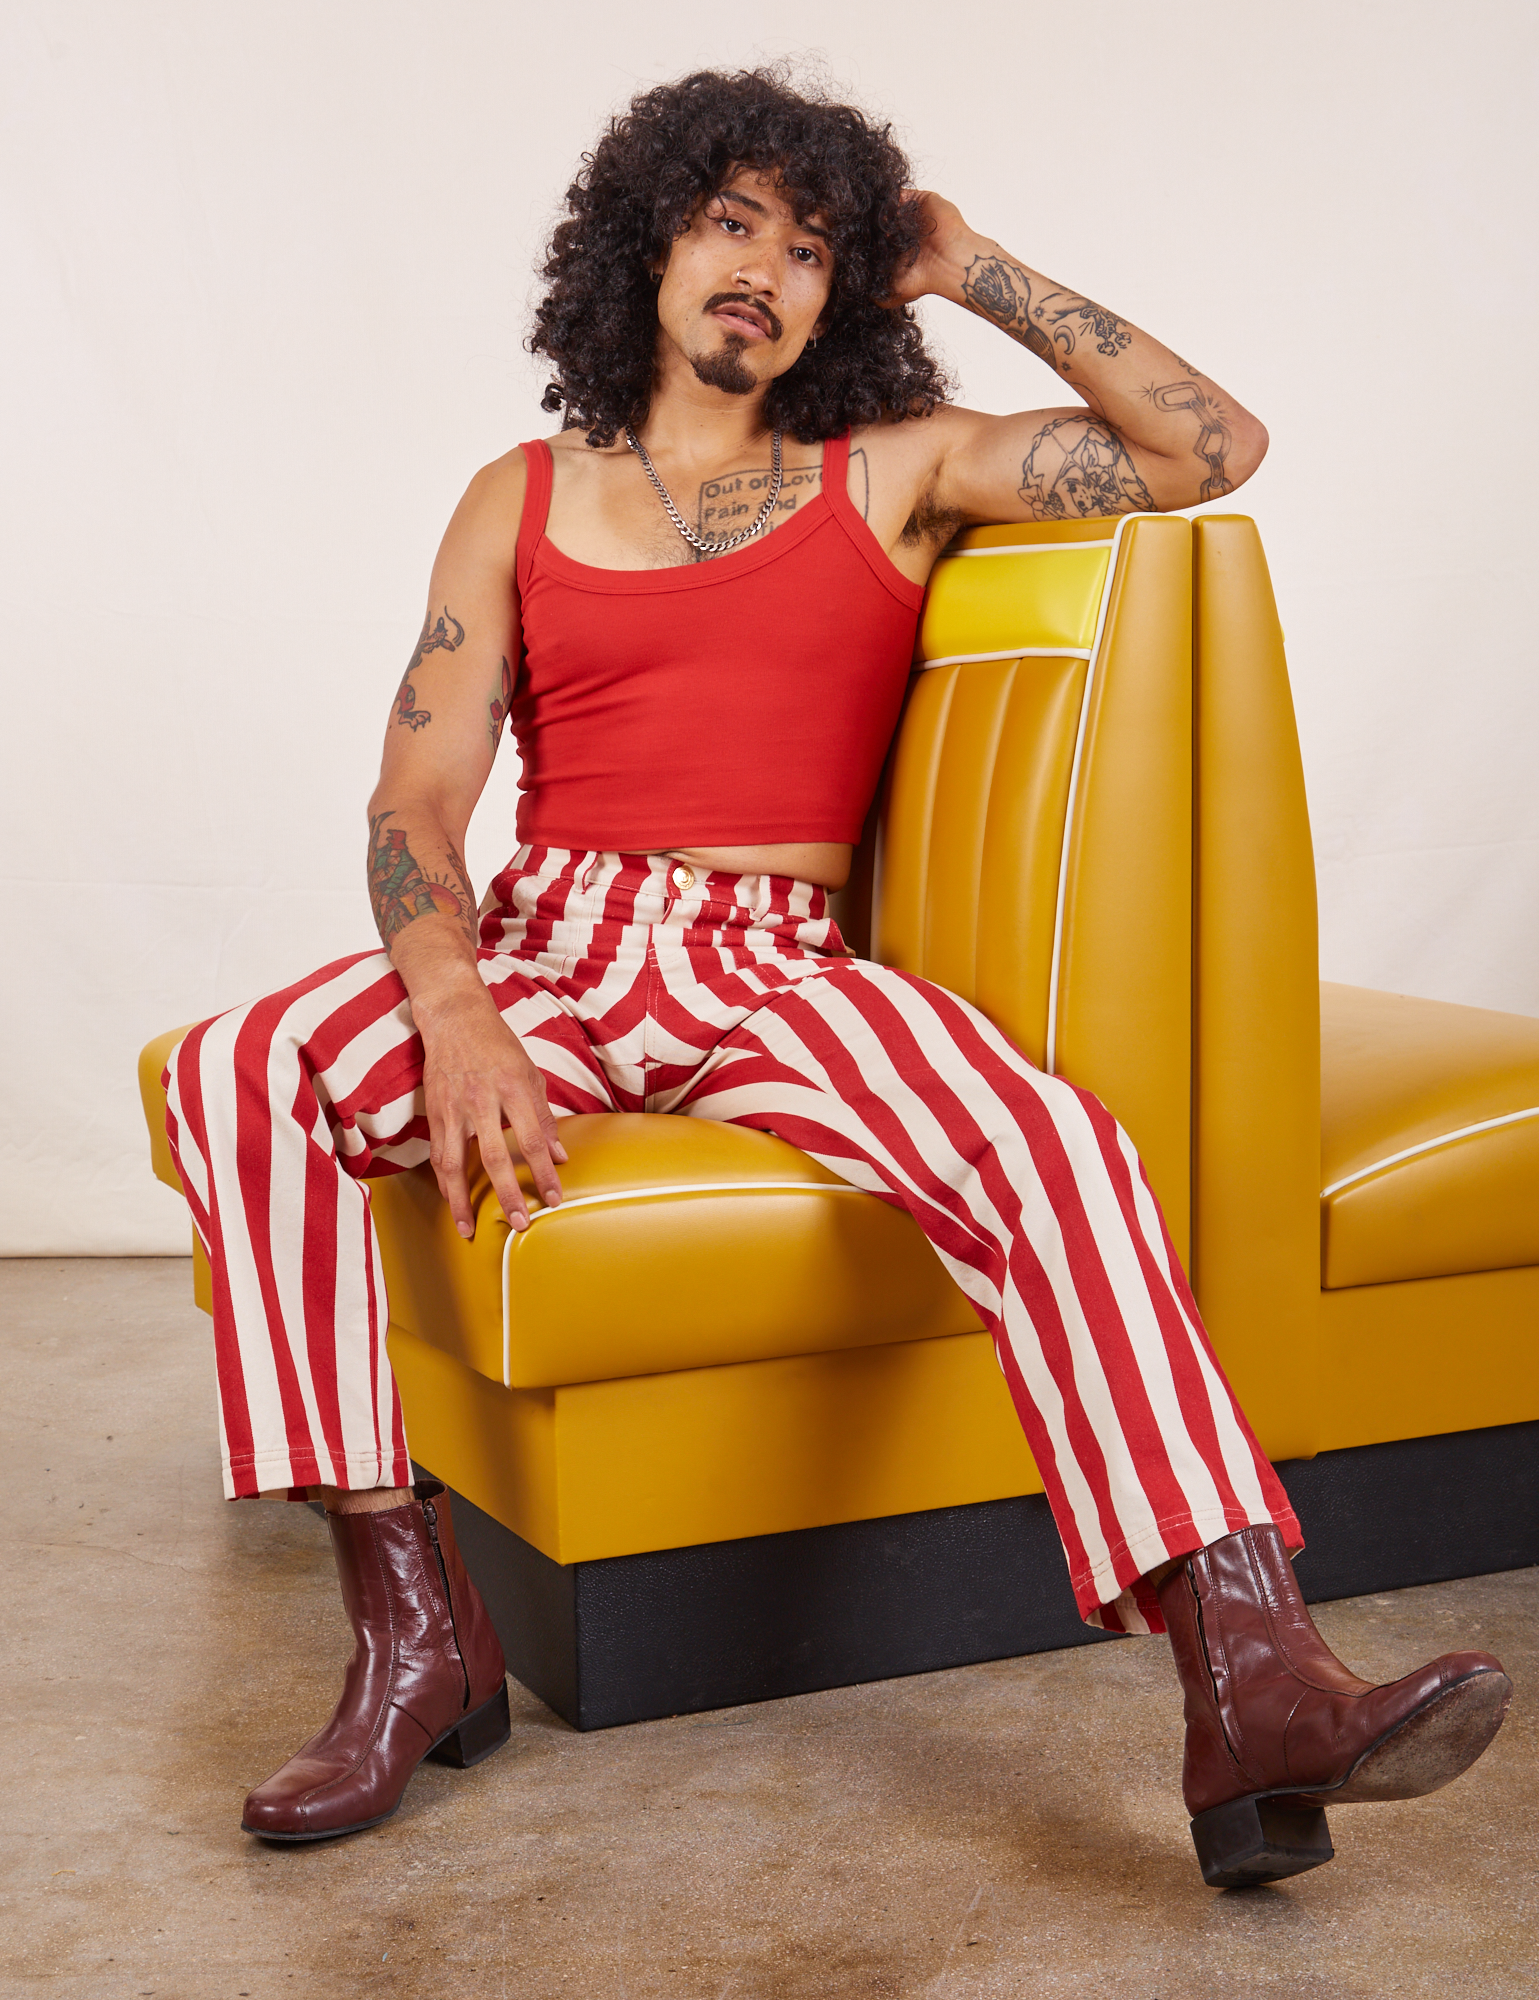 Jesse is wearing Work Pants in Cherry Stripe and mustang red Cropped Cami